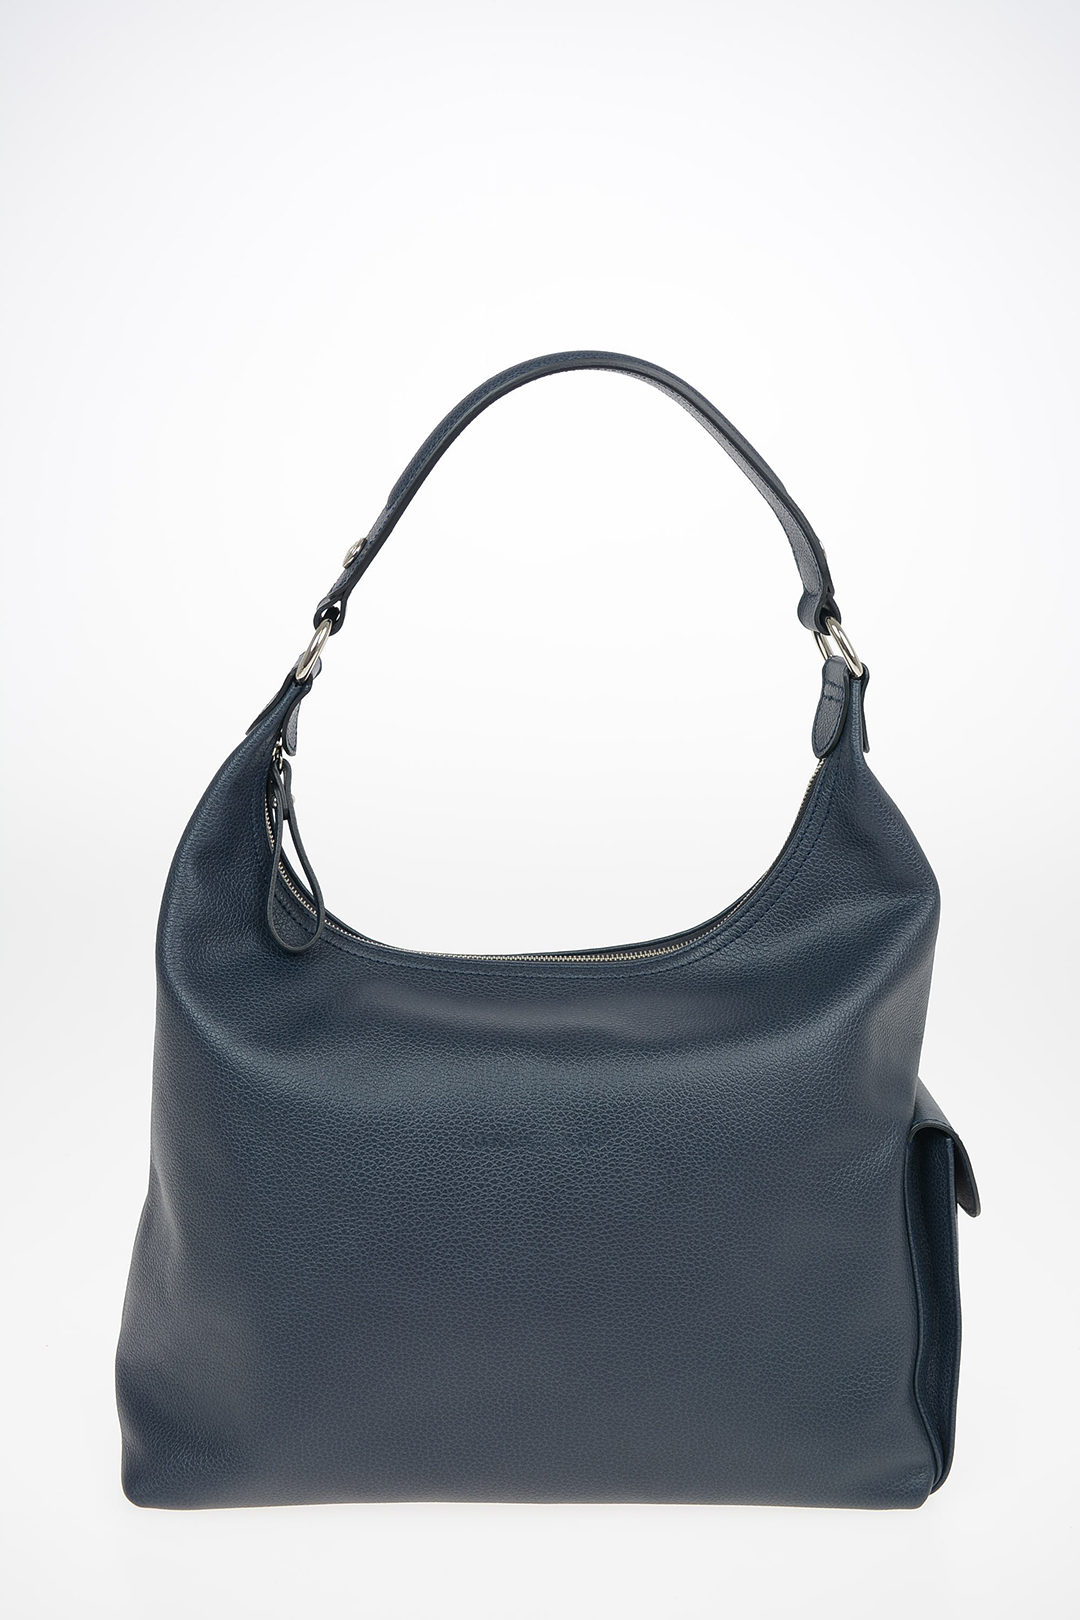 Longchamp Leather Hobo Bag with Outer Pocket women - Glamood Outlet